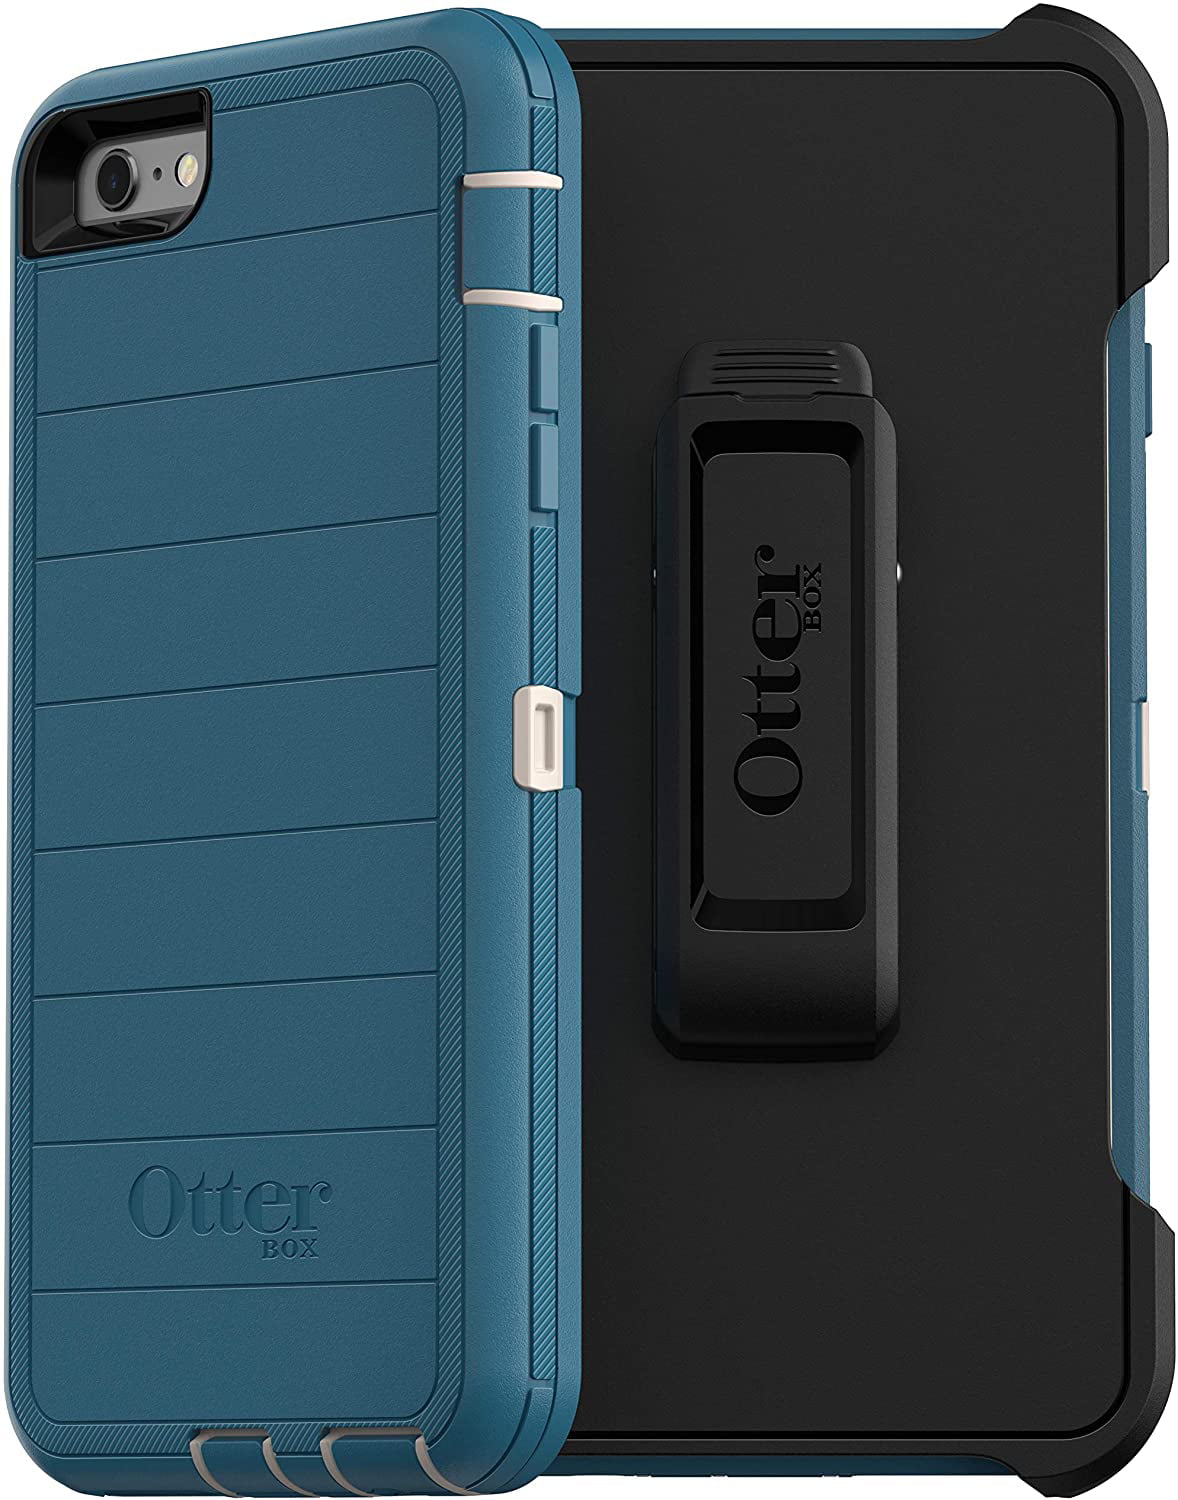 OtterBox Defender Series Rugged Case & Holster for iPhone 6s & 6, Big Sur